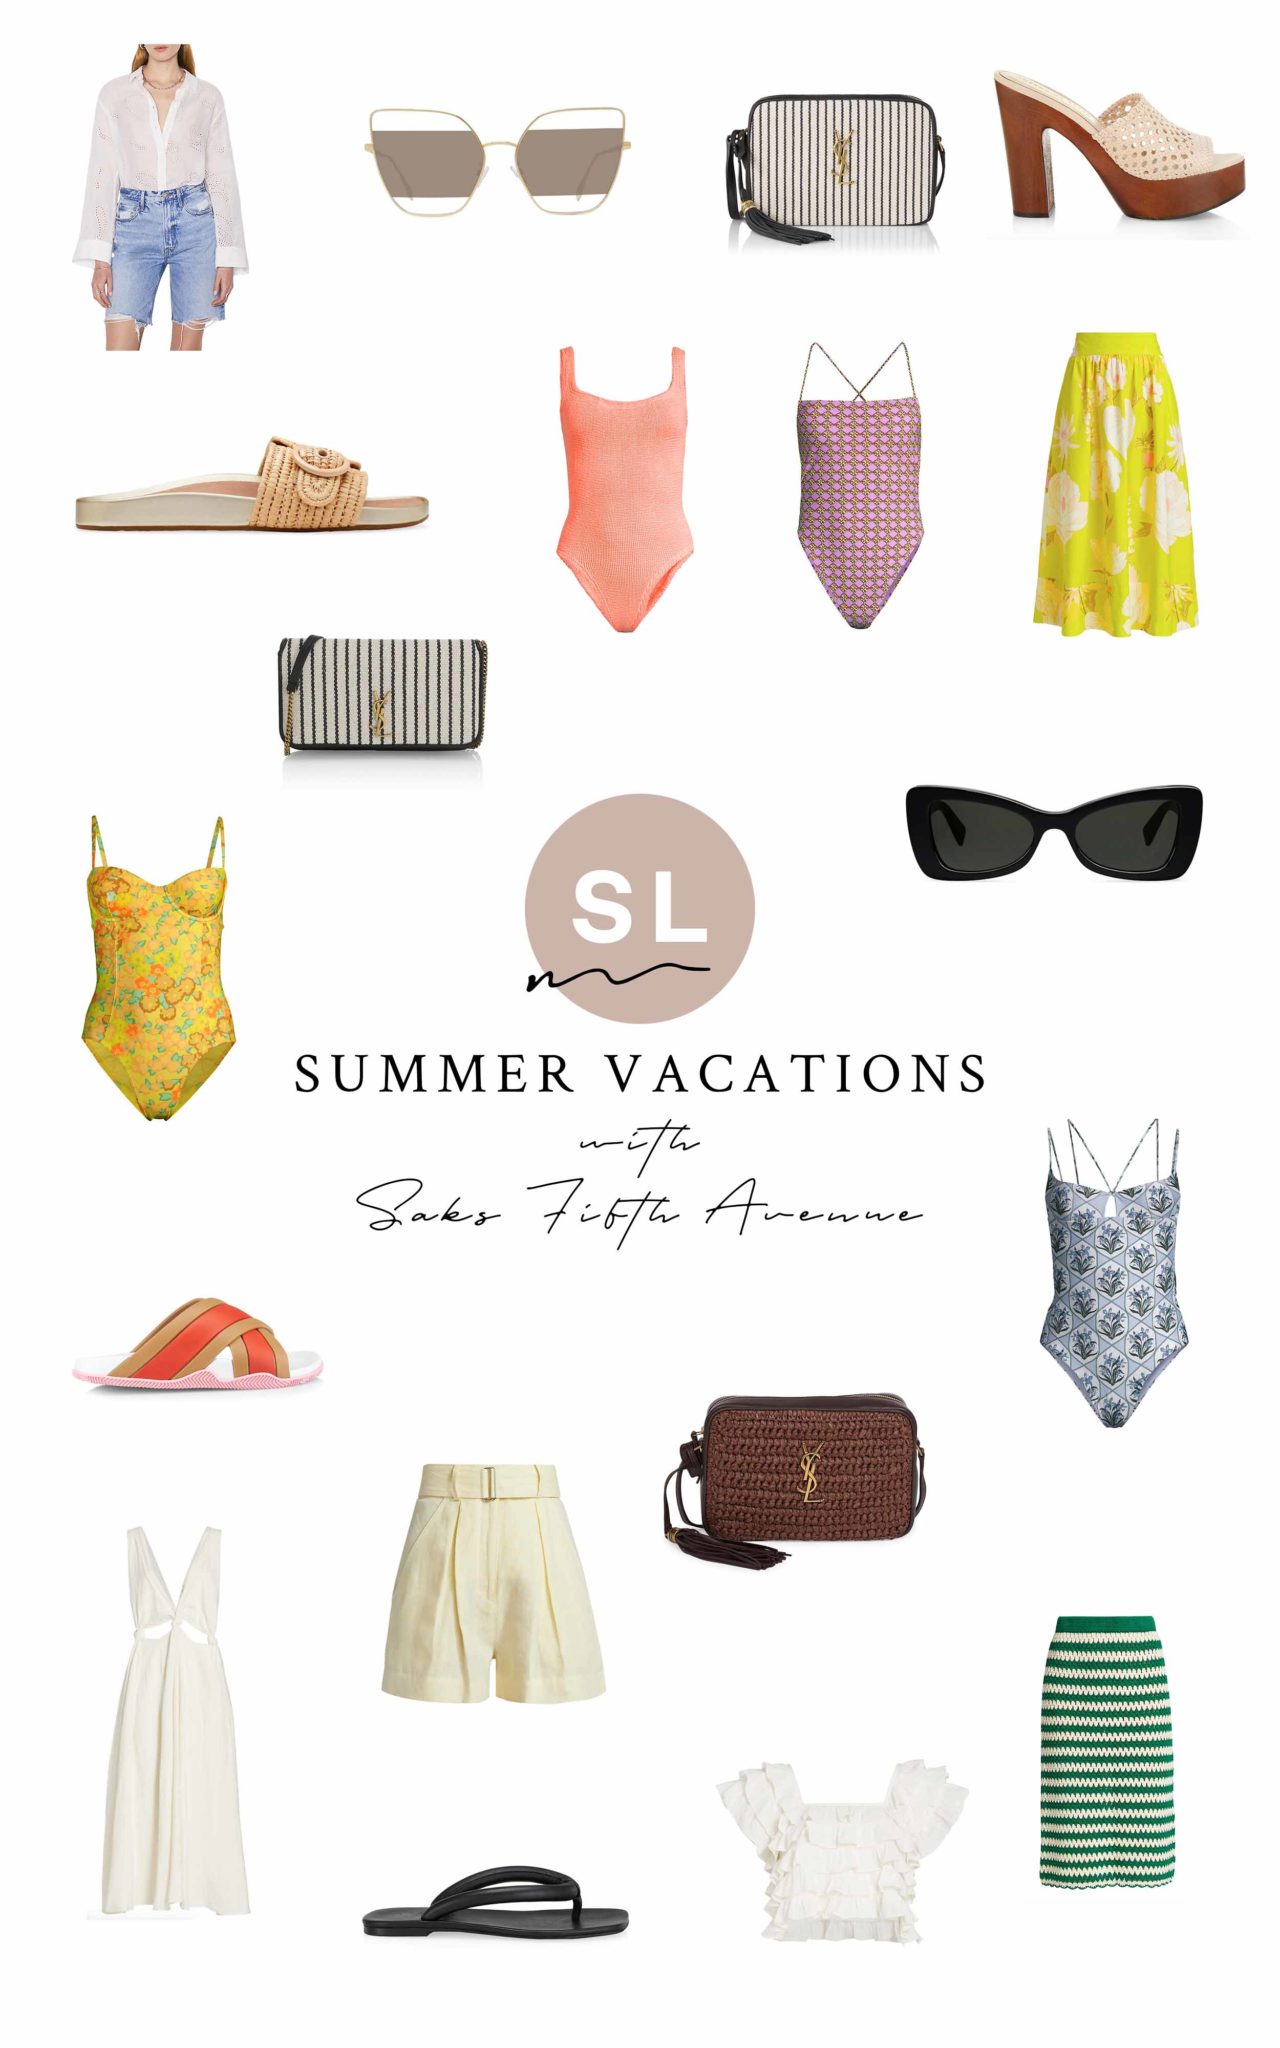 Summer Vacations With Saks Fifth Avenue